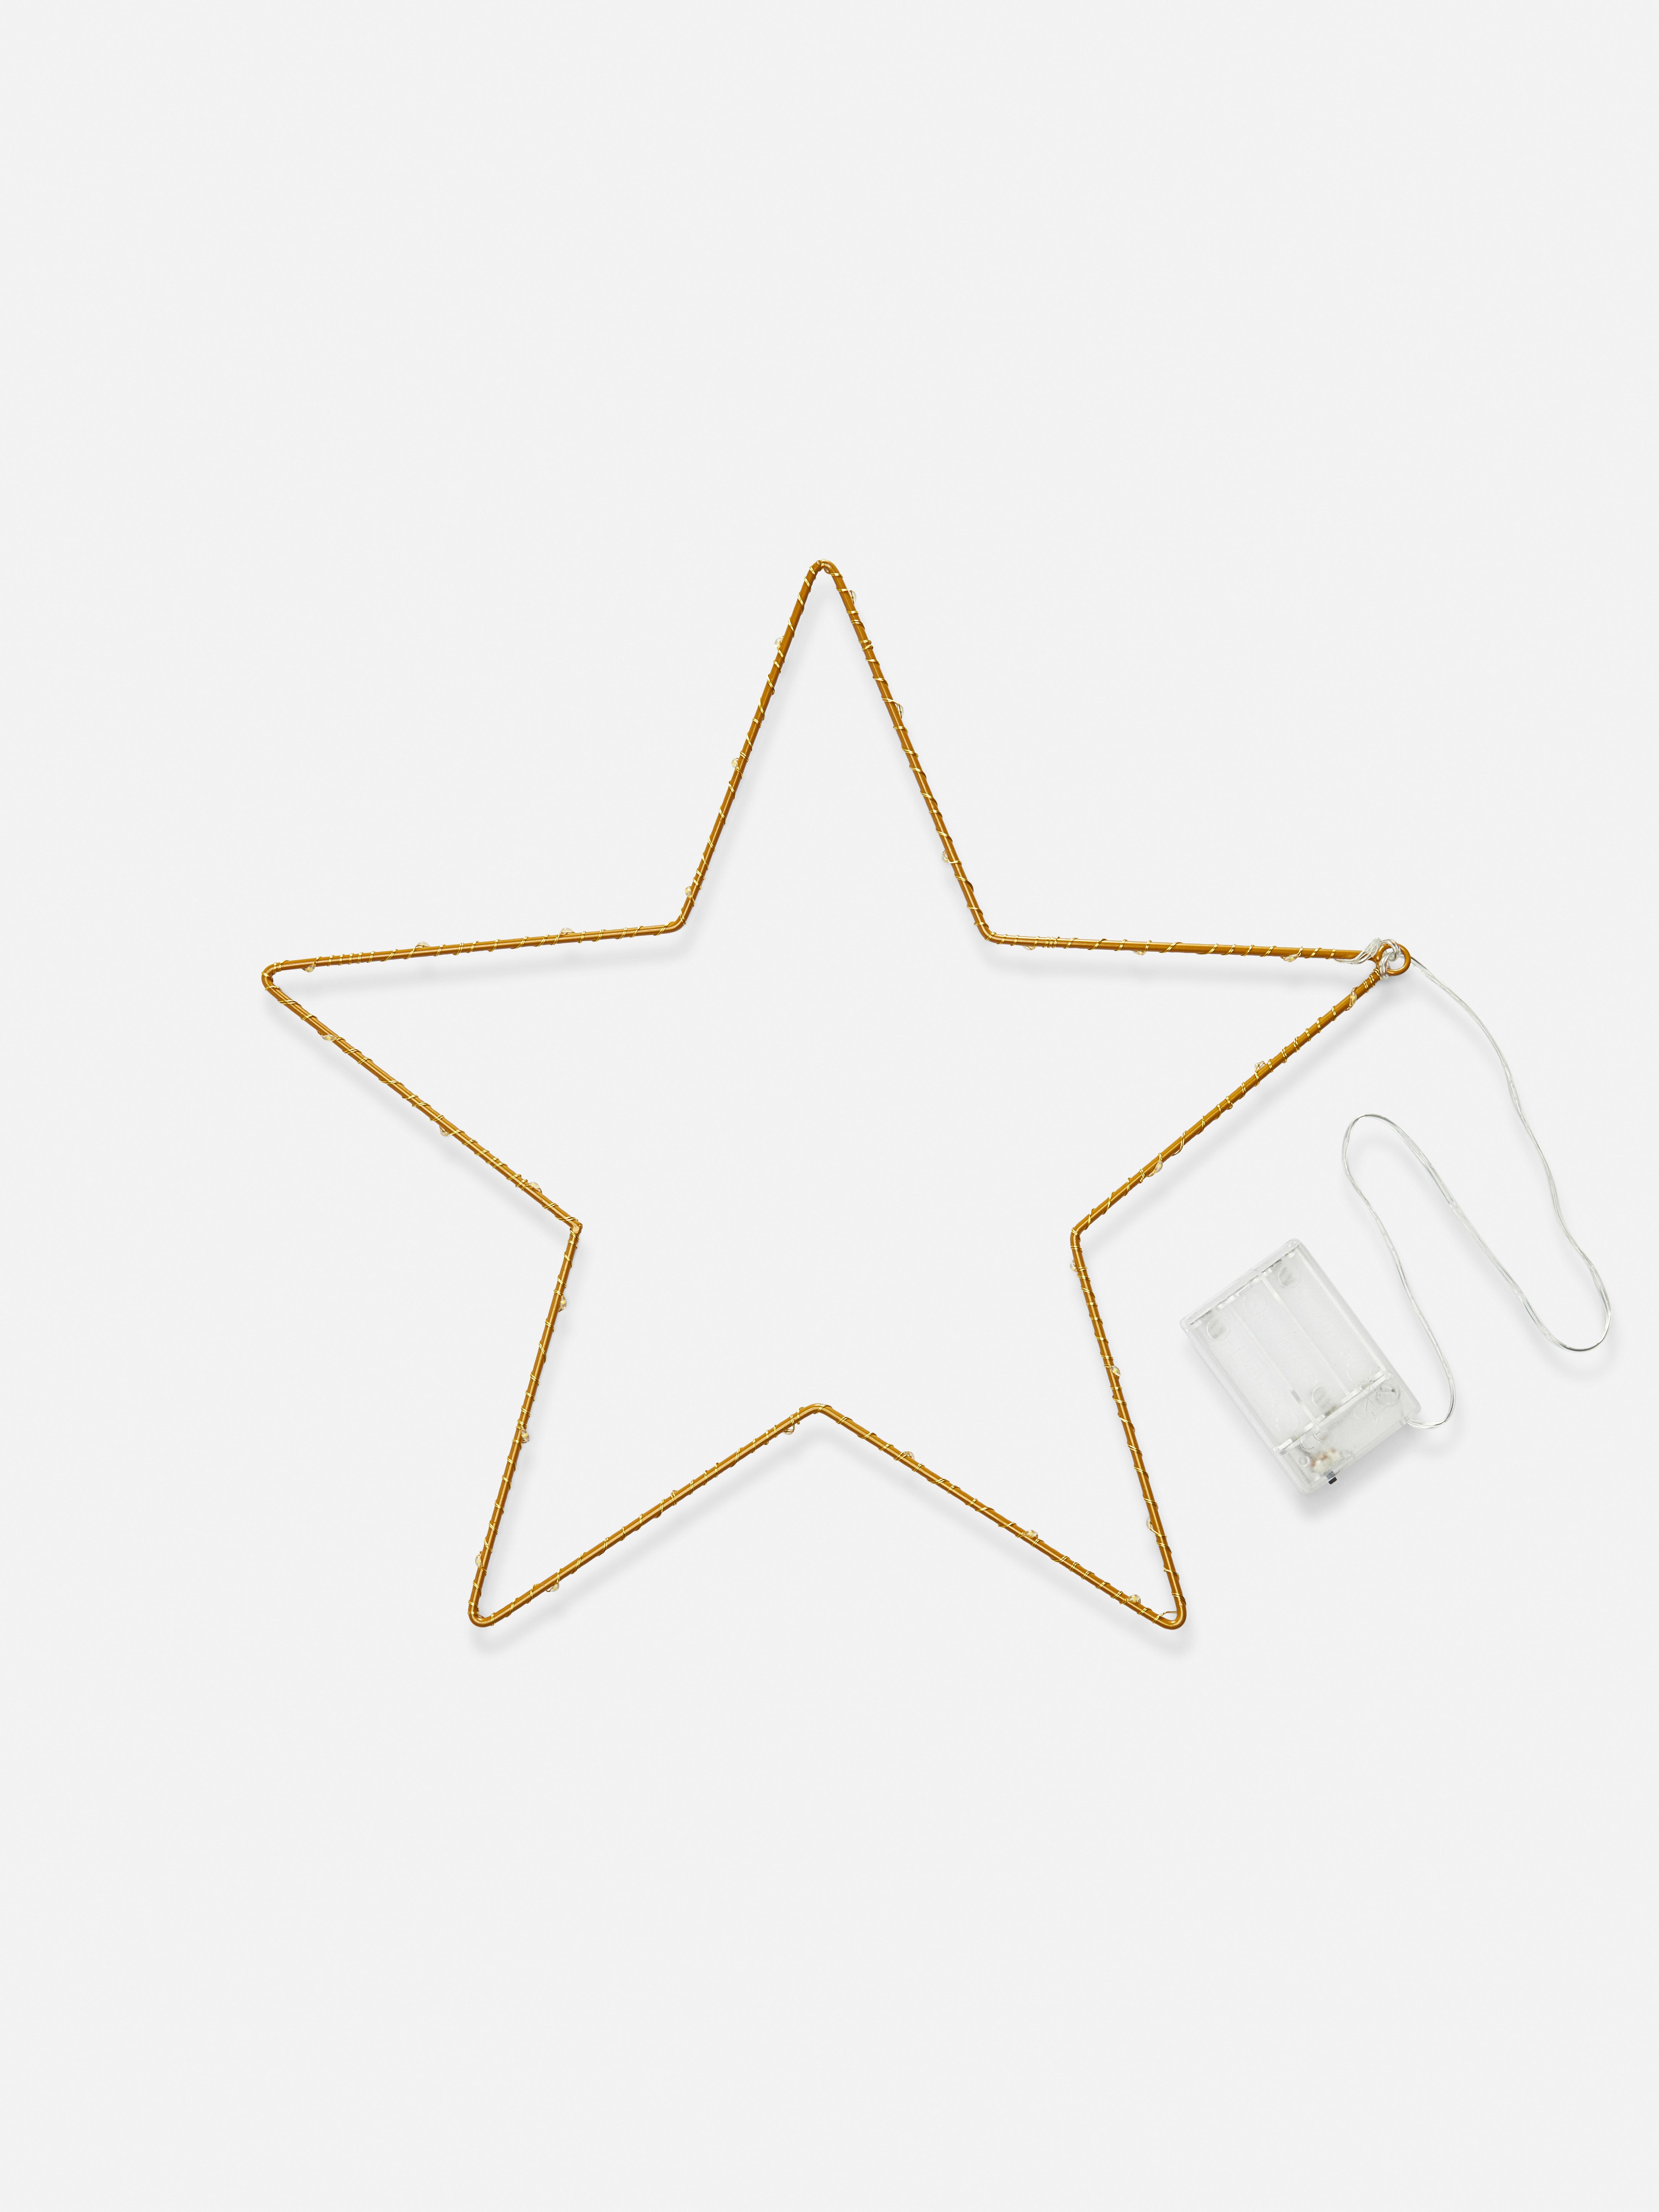 Star Shaped Wrap Wire Light